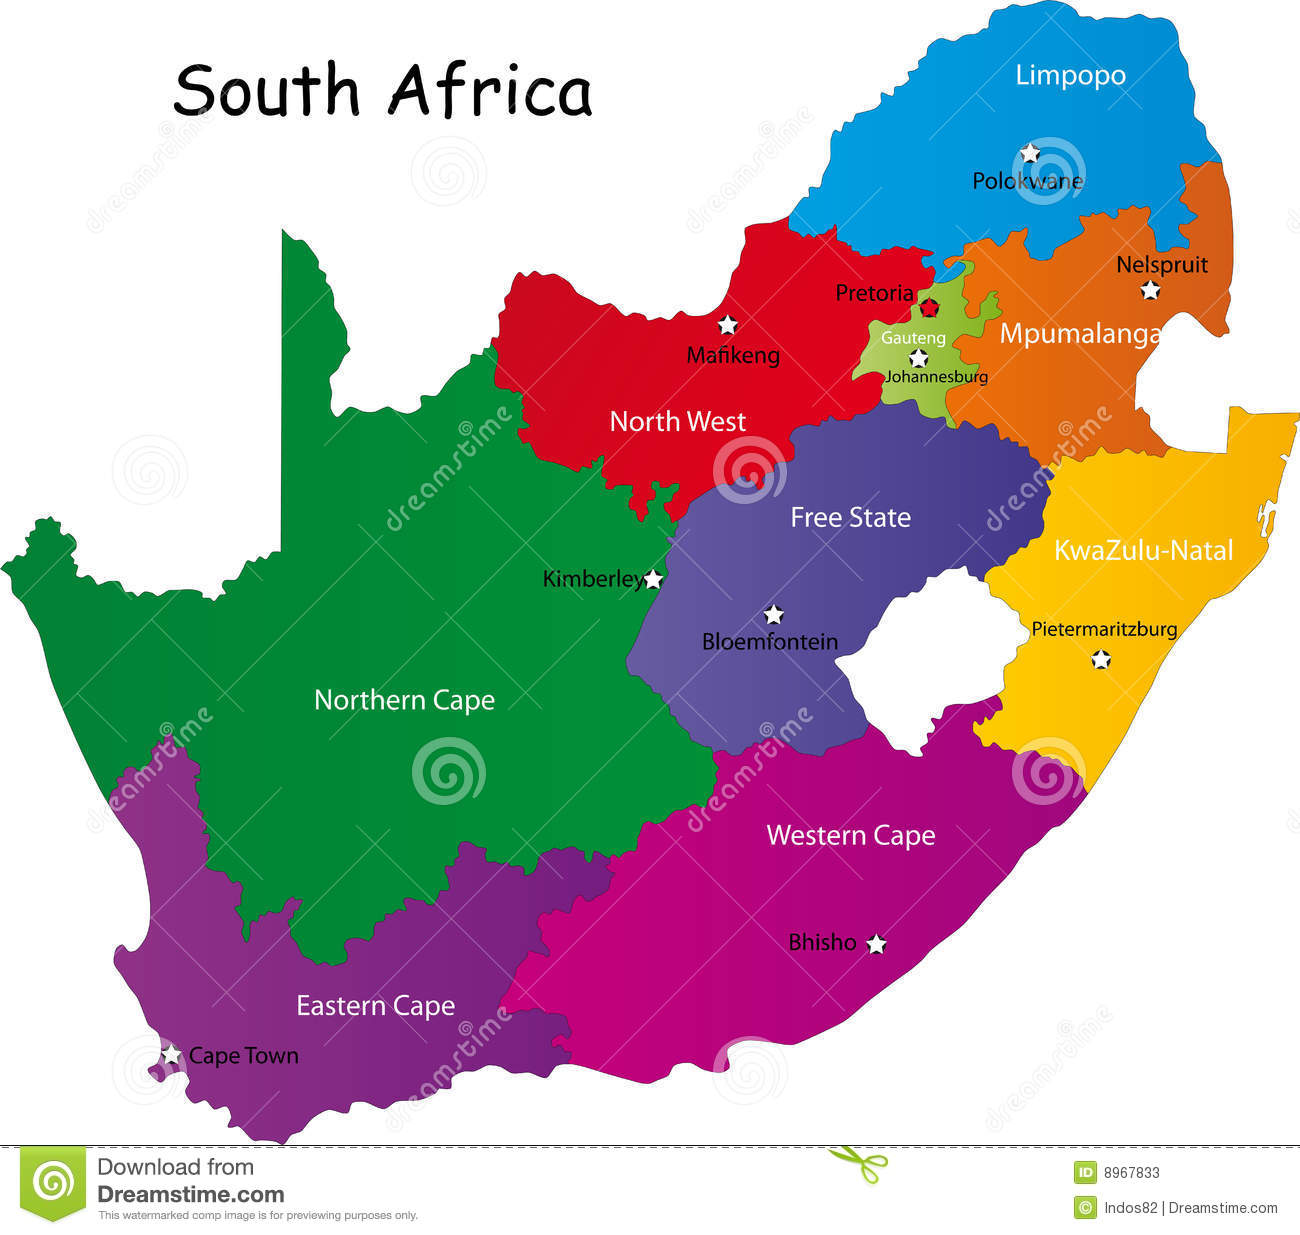 South Africa Map Designed In Illustration With The Provinces And The